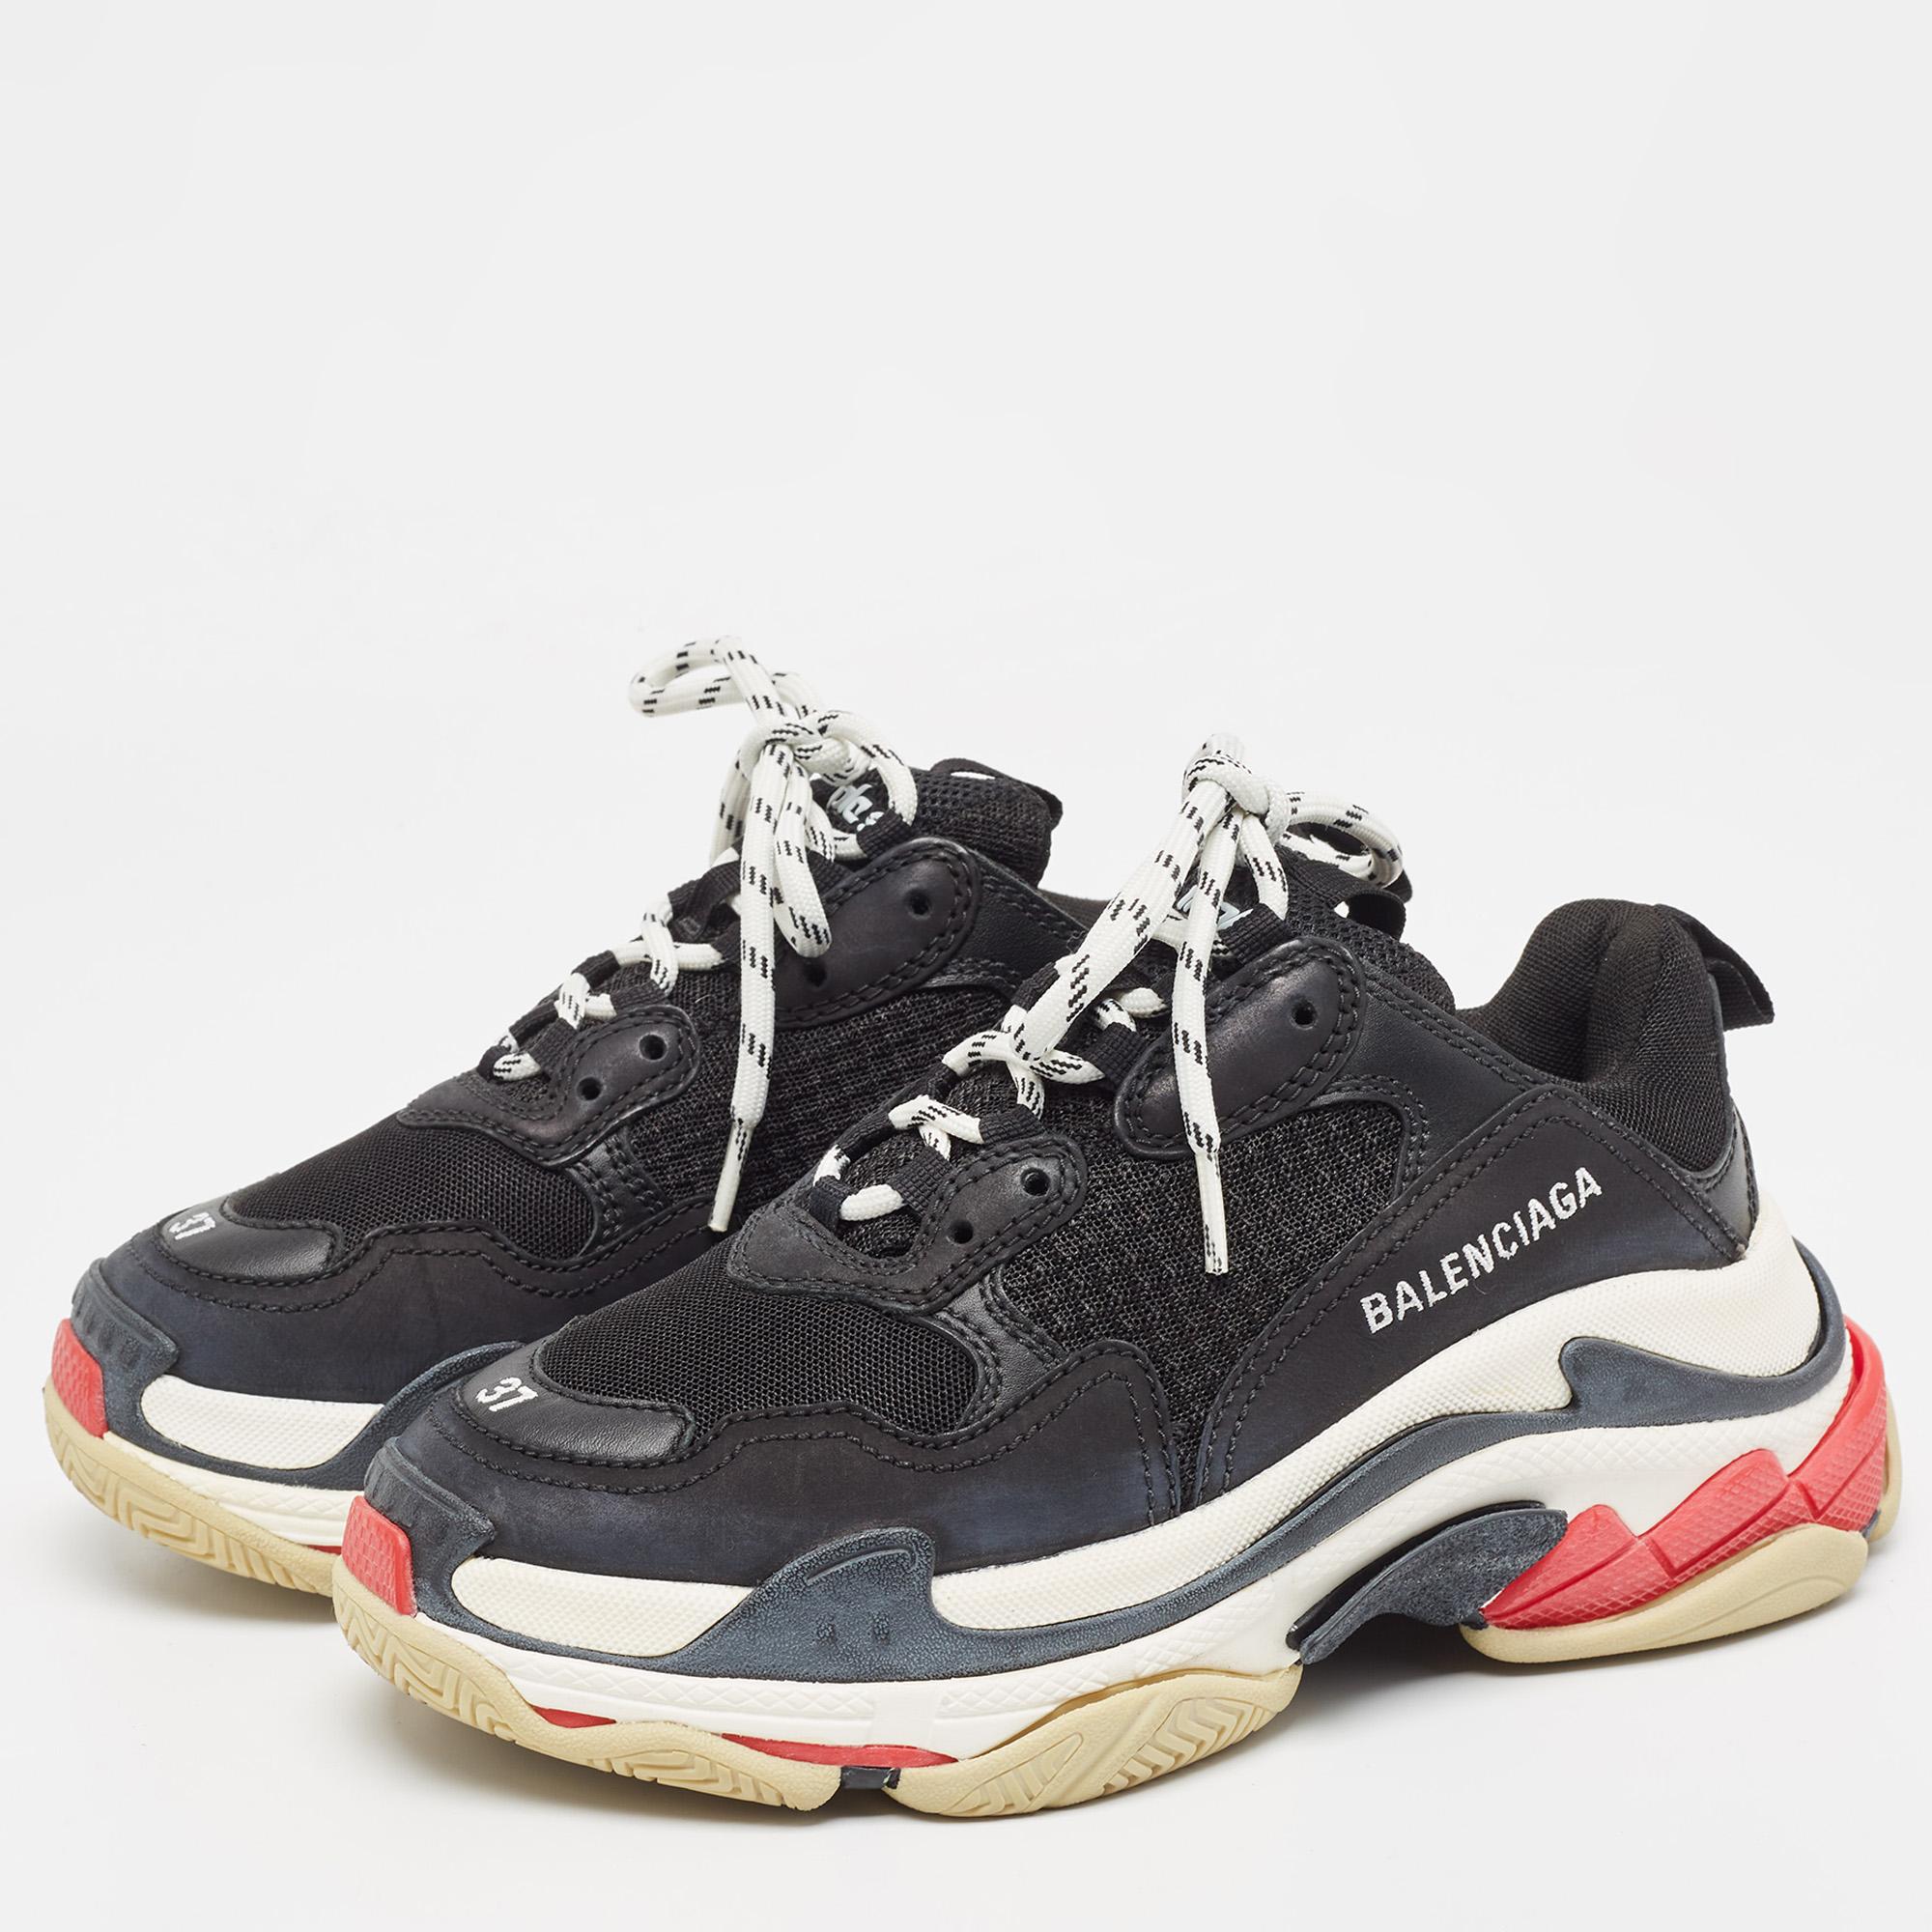 Balenciaga Black Mesh and Leather Triple S Sneakers Size 37 For Sale 3